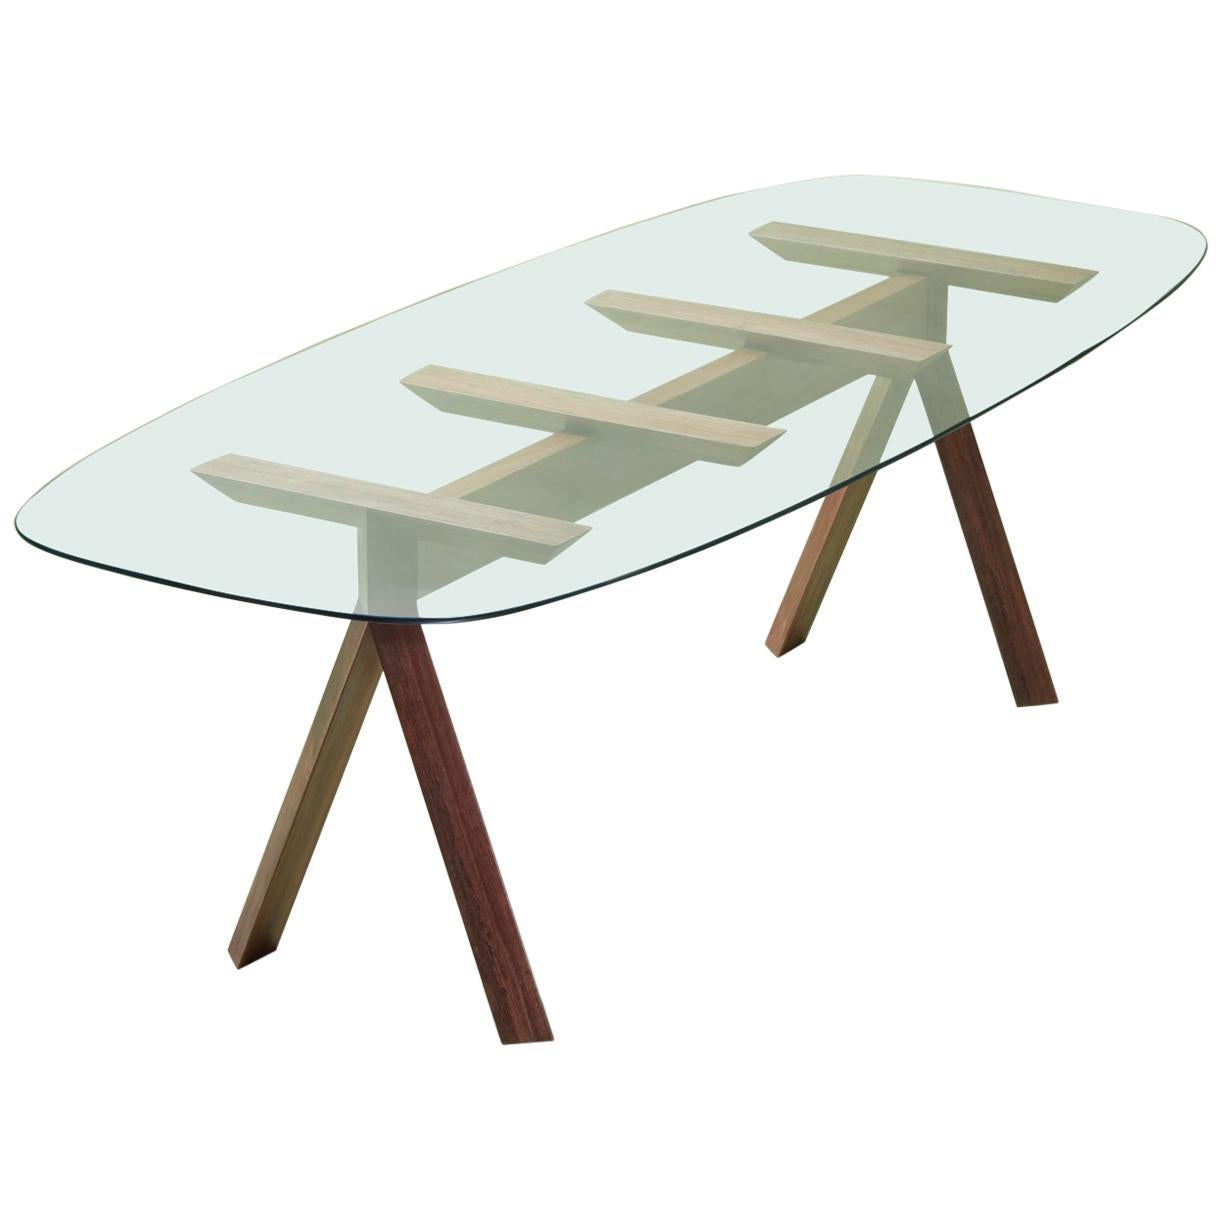 Tepacê Dining Table in Hardwood with Glass Top, Brazilian Contemporary Design